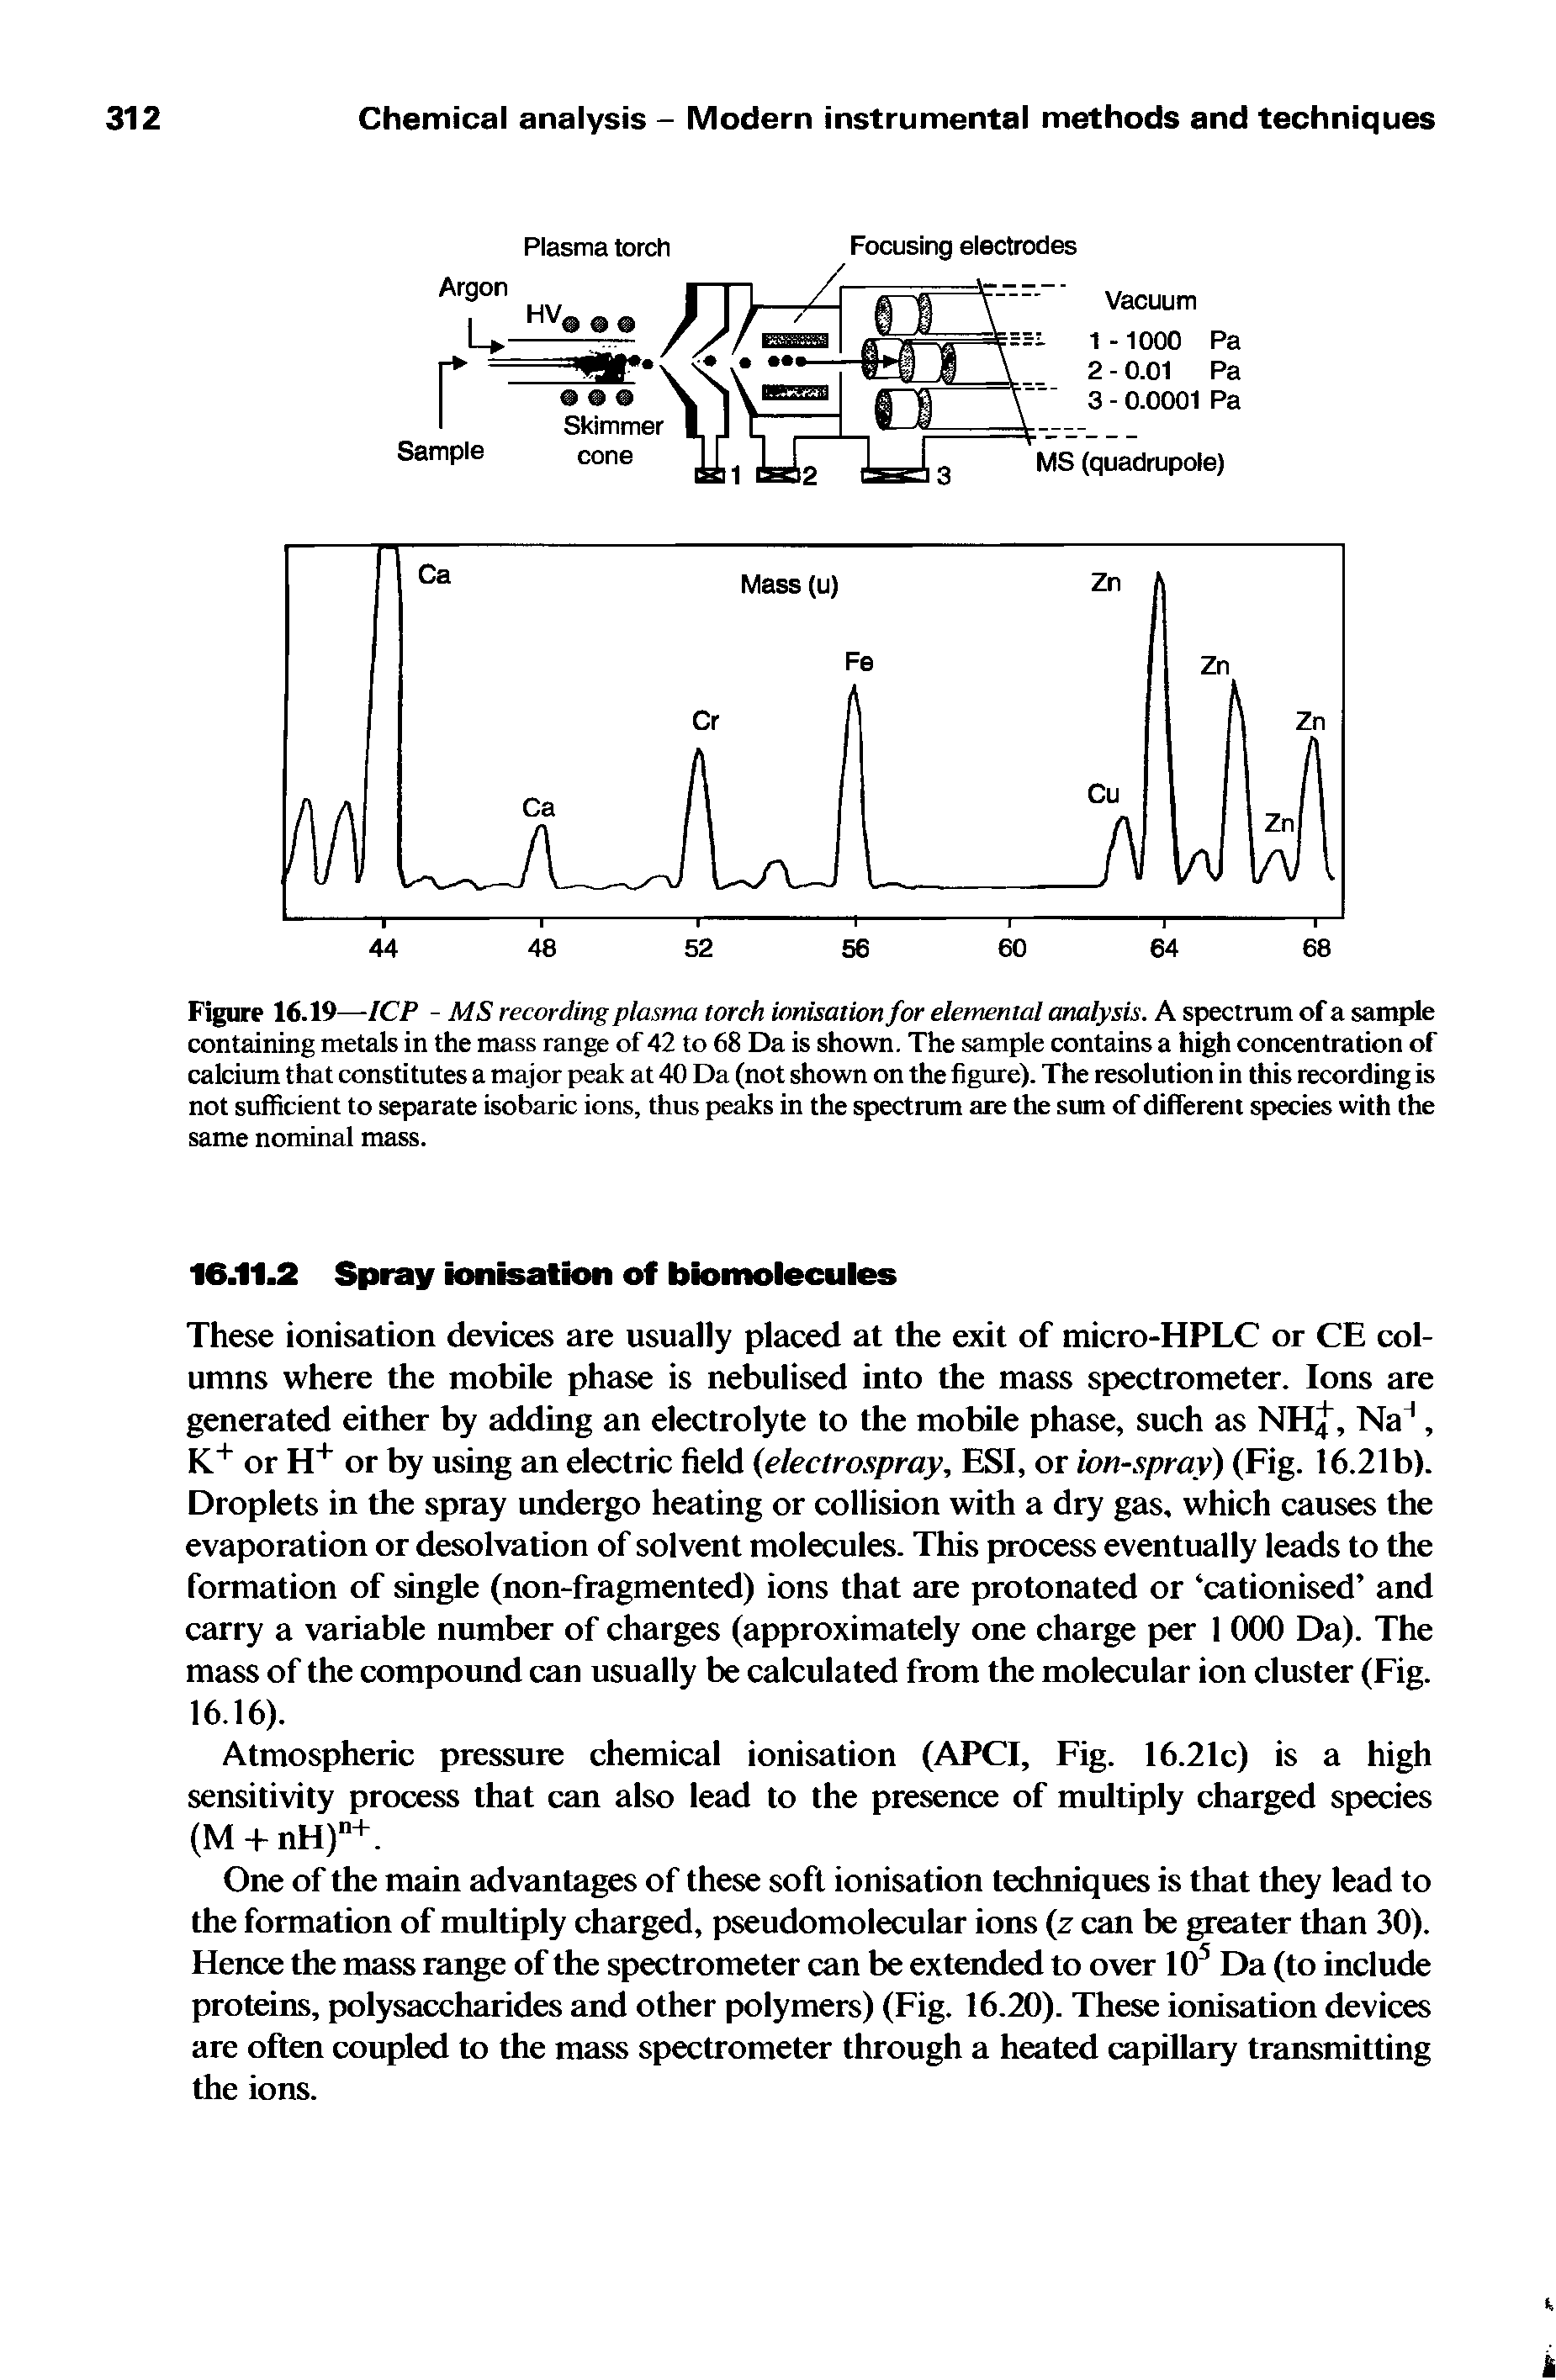 Figure 16.19—ICP - MS recording plasma torch ionisation for elemental analysis. A spectrum of a sample containing metals in the mass range of 42 to 68 Da is shown. The sample contains a high concentration of calcium that constitutes a major peak at 40 Da (not shown on the figure). The resolution in this recording is not sufficient to separate isobaric ions, thus peaks in the spectrum are the sum of different species with the same nominal mass.